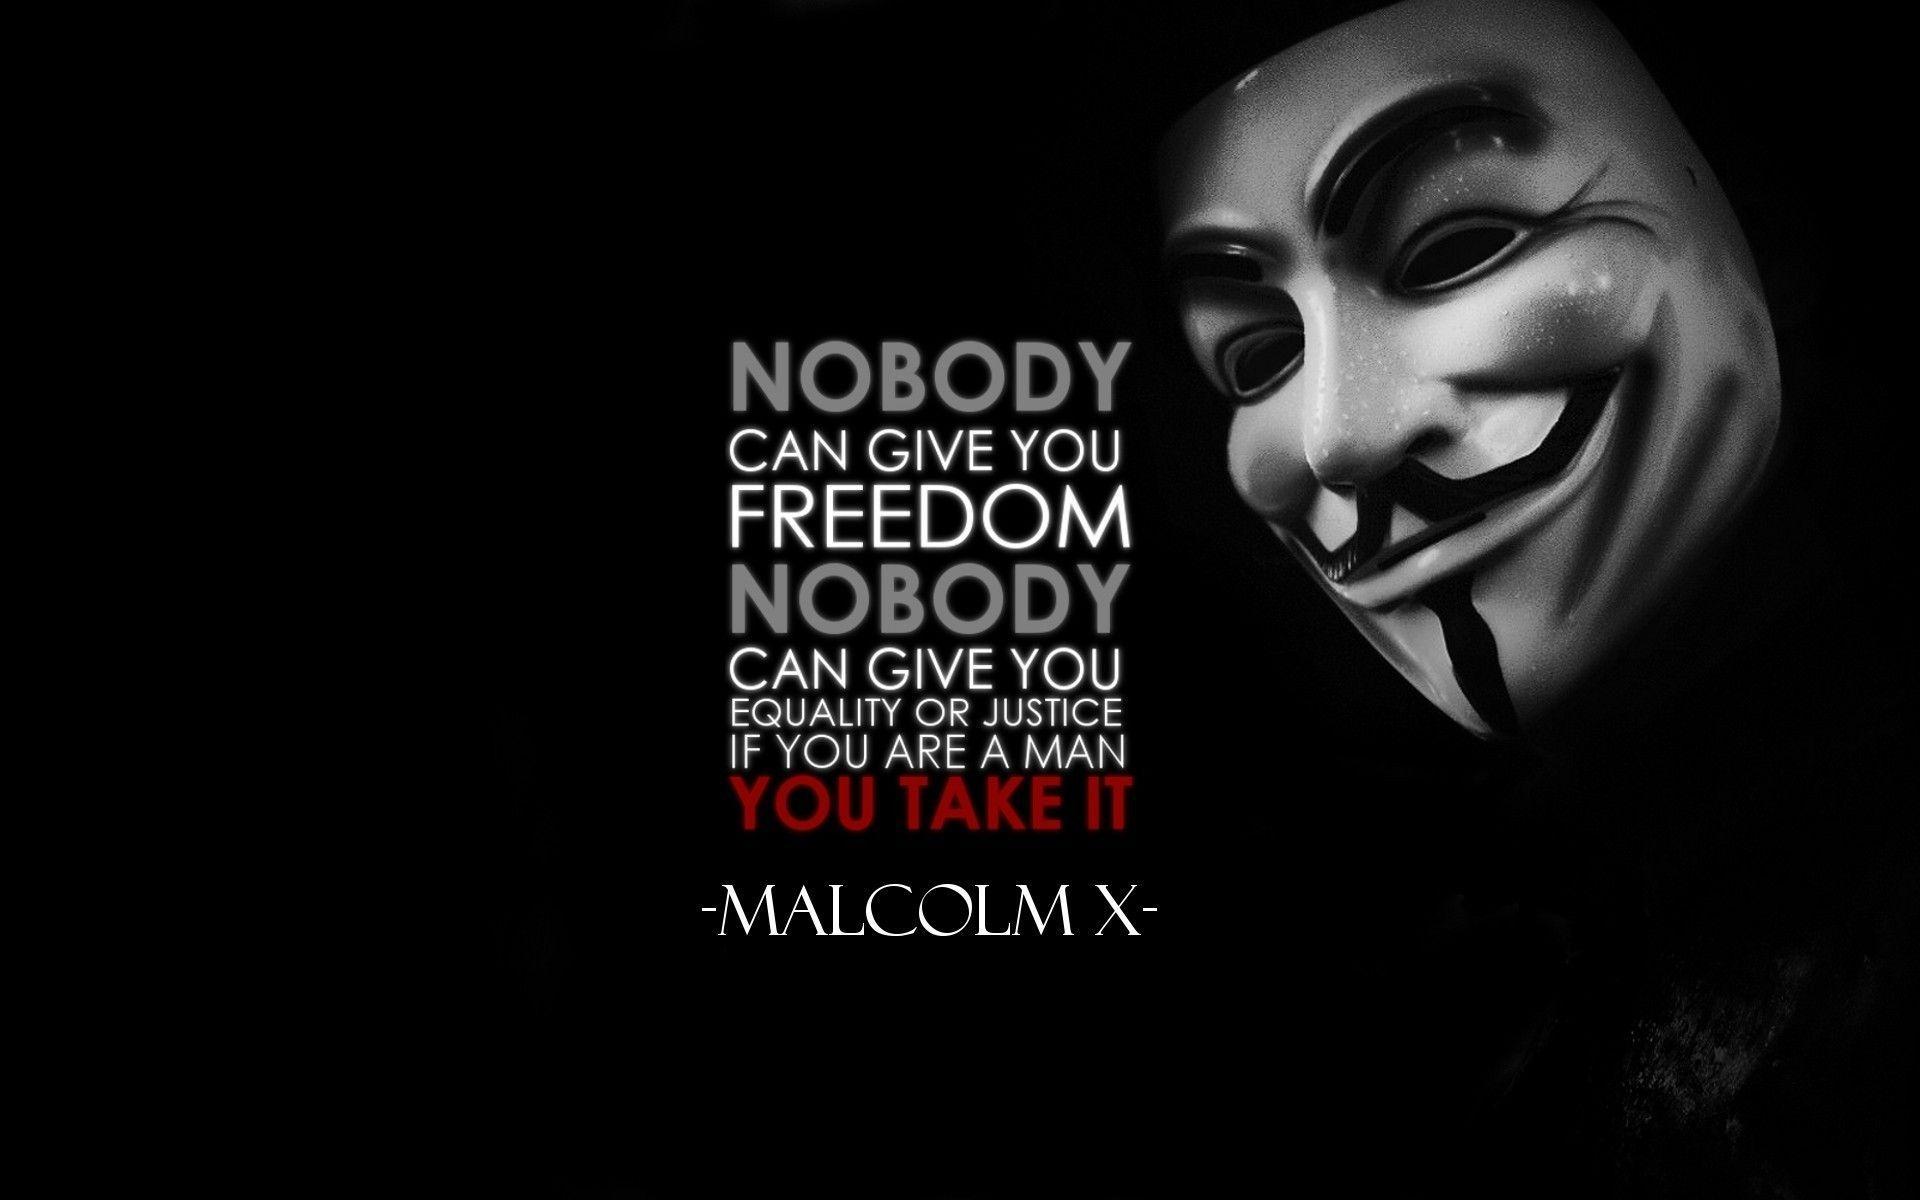 Malcolm X Quote Quote Hd Wallpaper 1920x1200 3722 Quotes Wallpaper